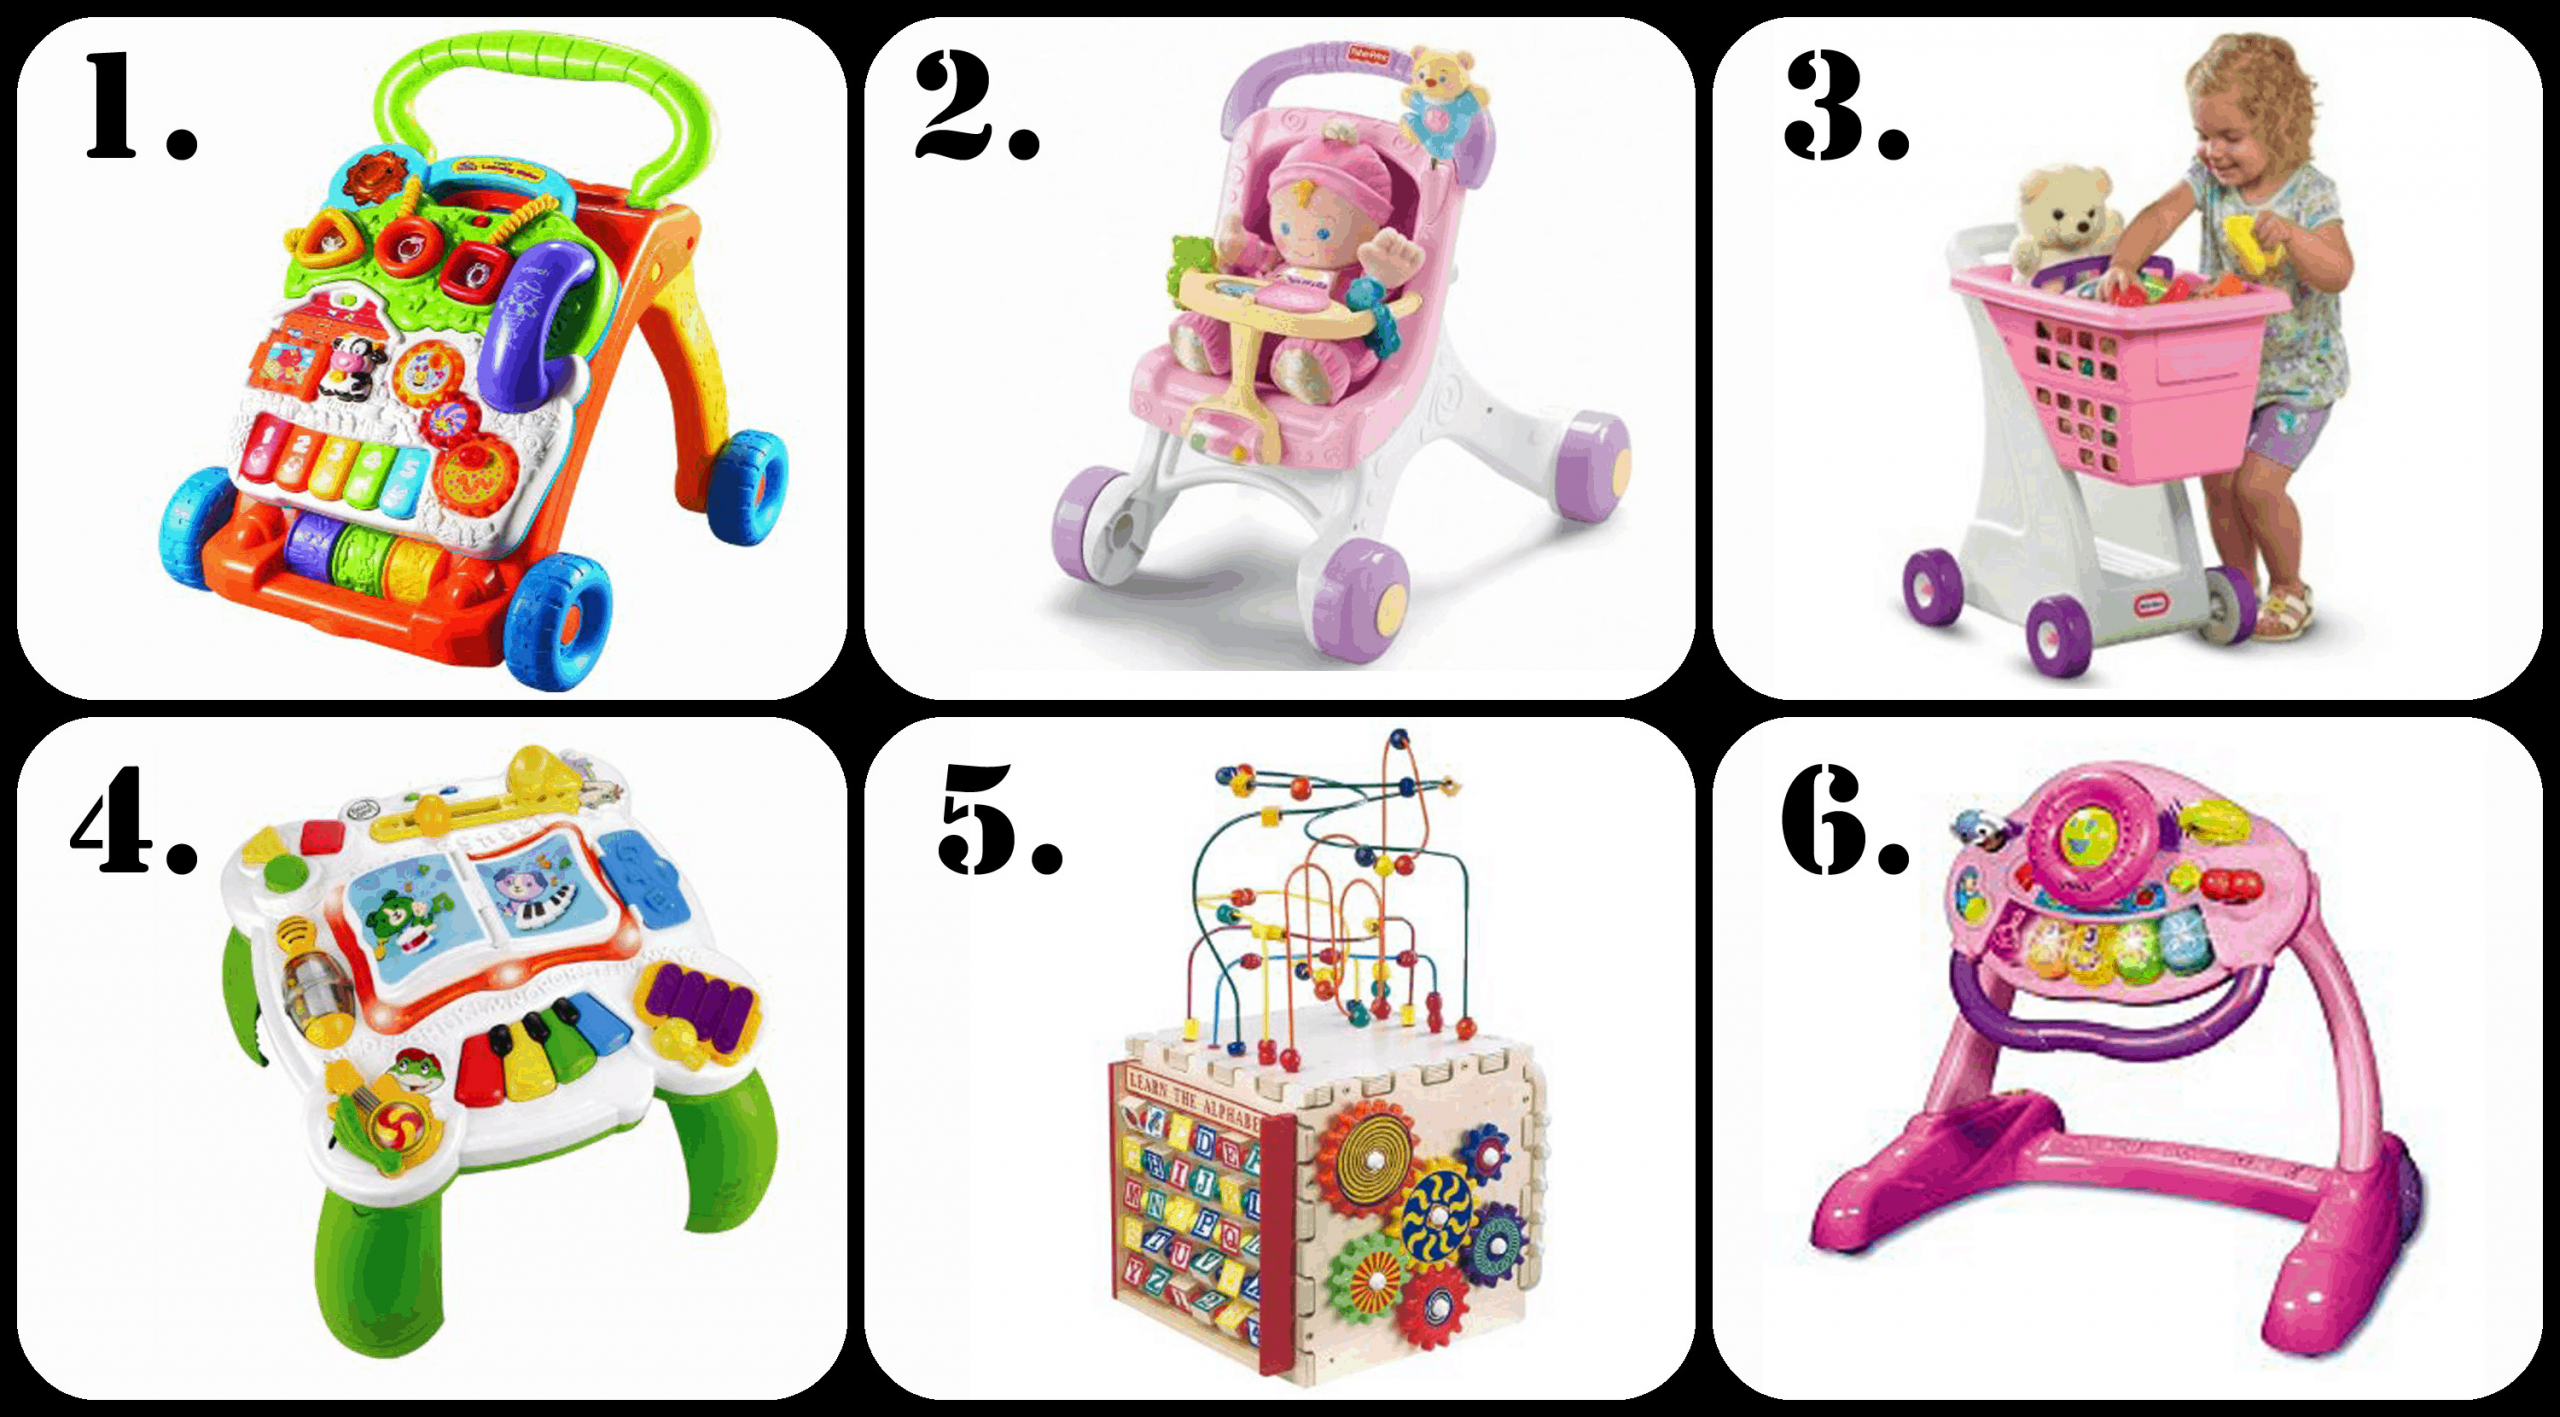 Gifts For A 1 Year Old Child
 The Ultimate List of Gift Ideas for a 1 Year Old Girl